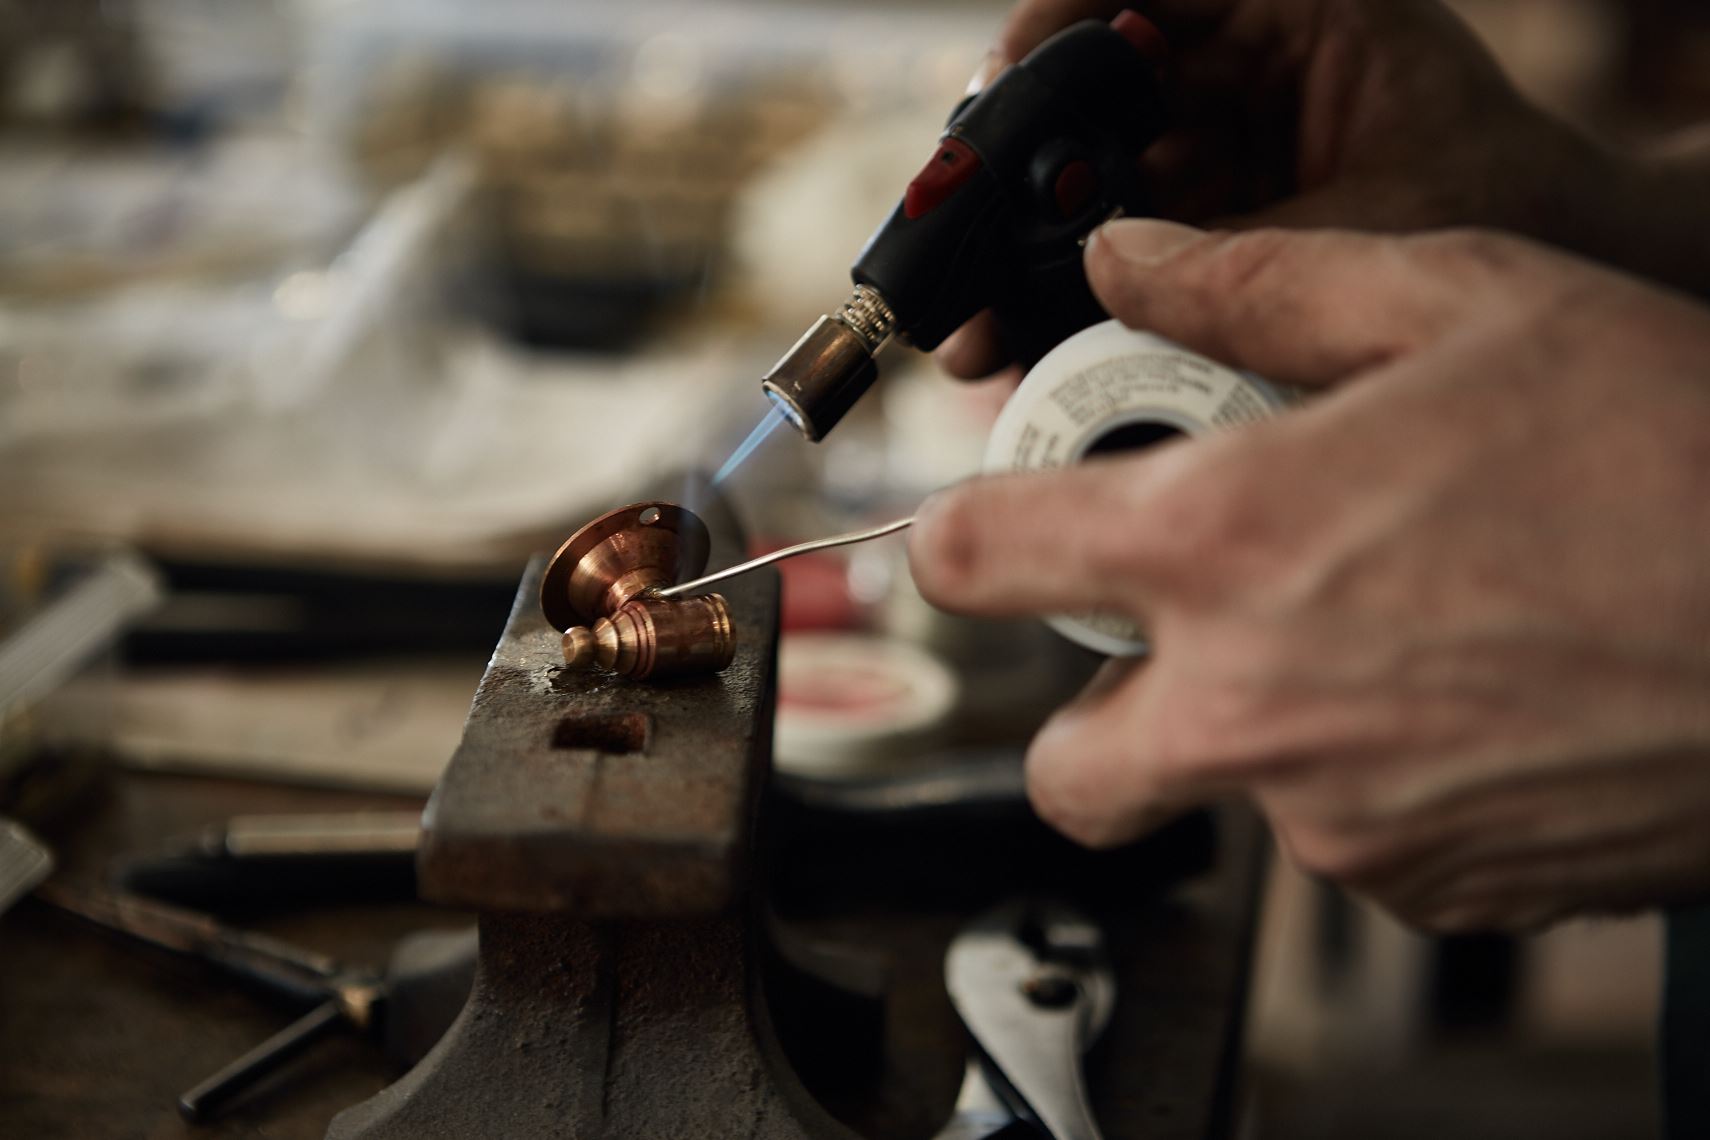 Soldering a part at Lighting Lab, Atlanta by lifestyle photographer